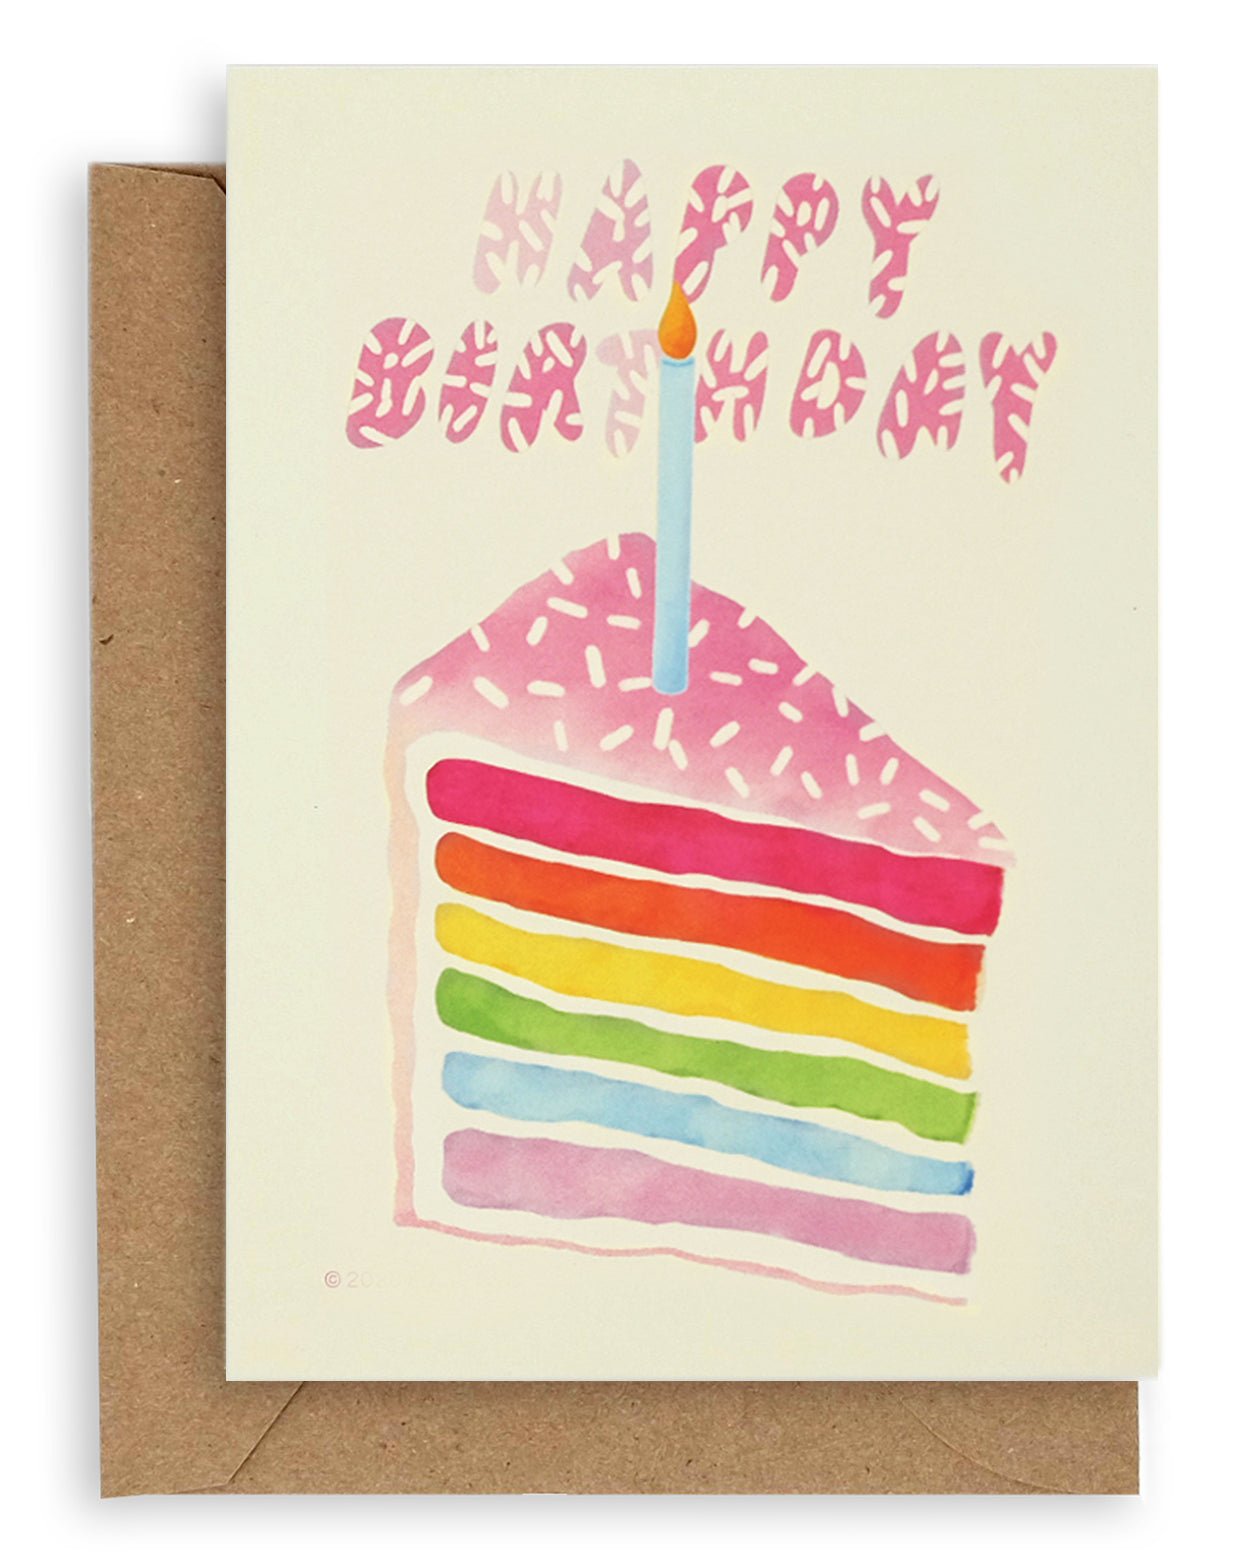 Cream colored card with soft pink text that reads "Happy Birthday" with white sprinkles on it. Below the text is a soft pink cake of the same shade with white sprinkles on top and rainbow colored layers inside of it with a kraft envelope under the card.